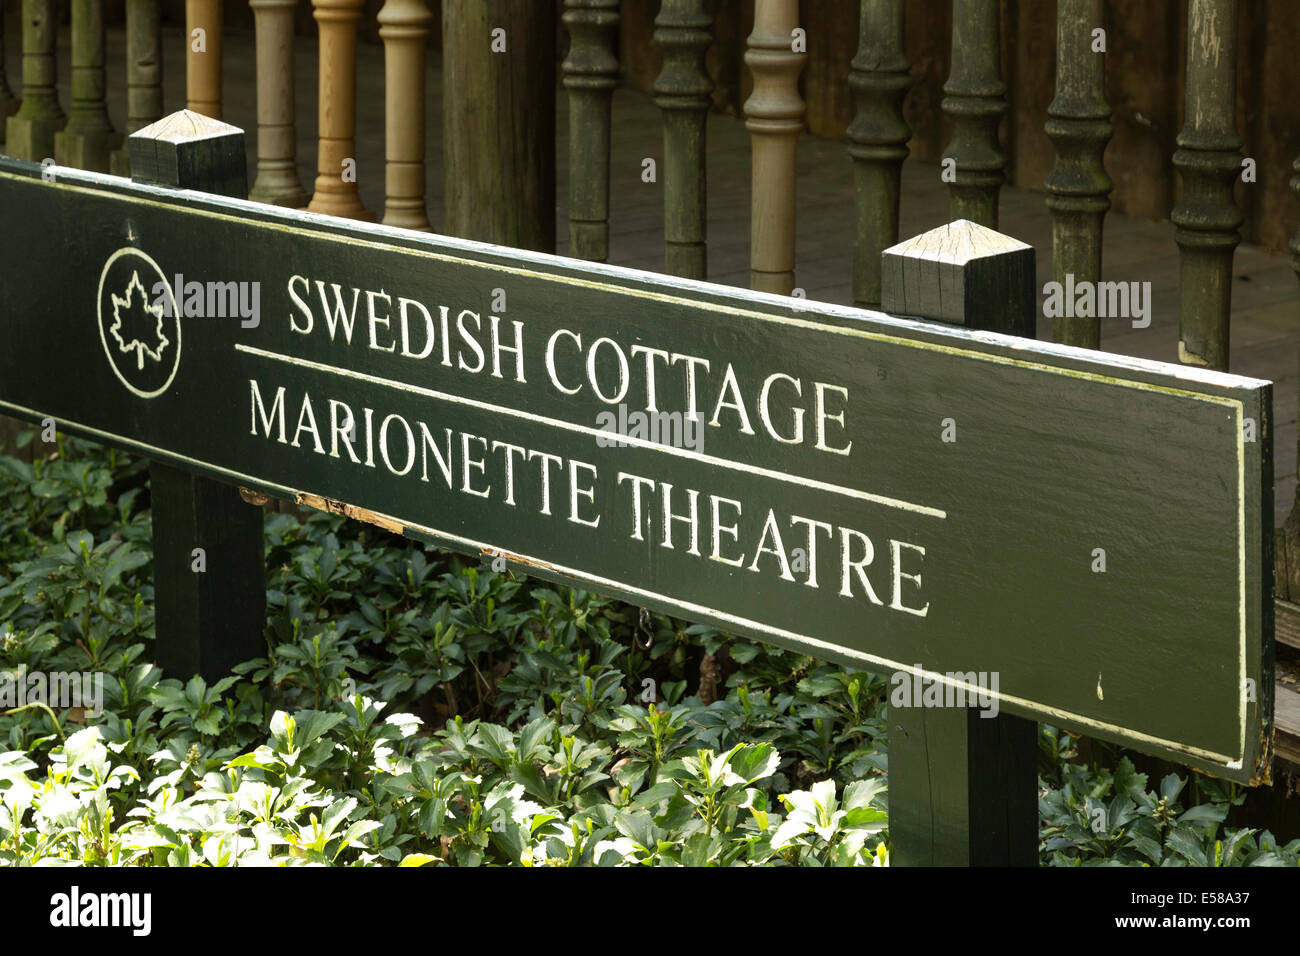 Swedish Cottage Marionette Theatre Sign in Central Park, NYC, USA Stock Photo